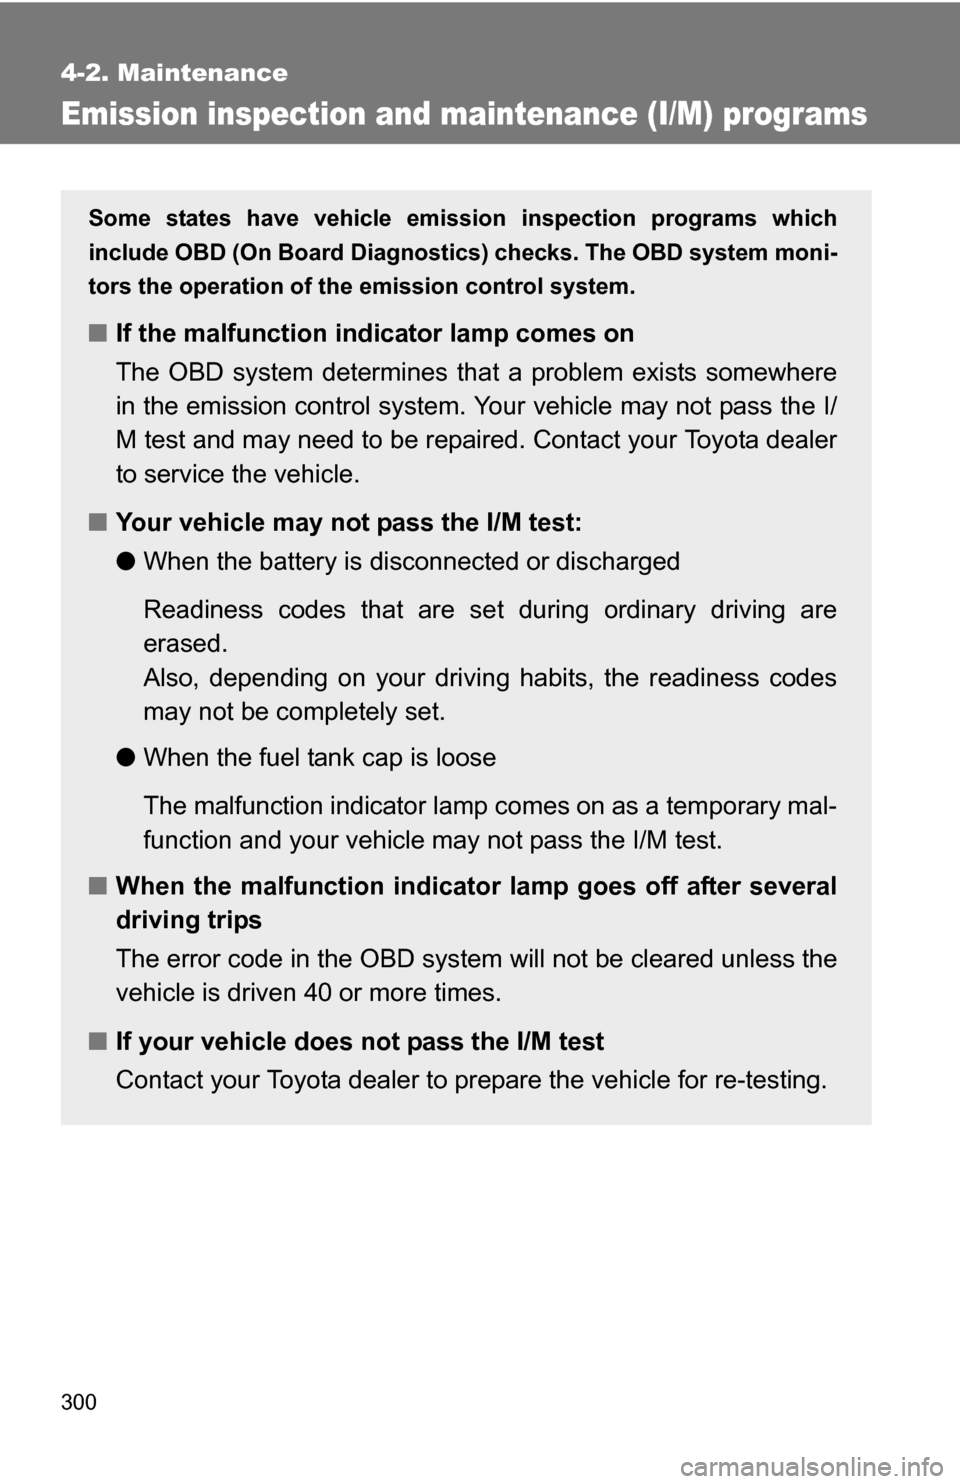 TOYOTA COROLLA 2009 10.G Owners Manual 300
4-2. Maintenance
Emission inspection and maintenance (I/M) programs
Some states have vehicle emission inspection programs which
include OBD (On Board Diagnostics) checks. The OBD system moni-
tors